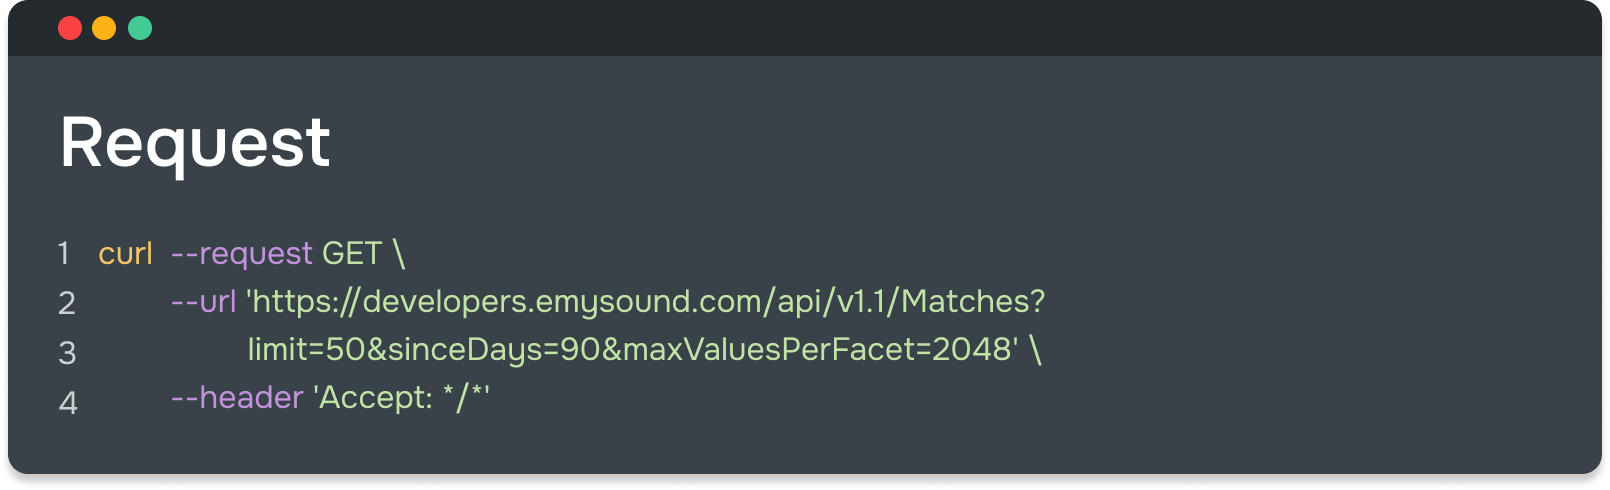 An example of a cURL request sent to Emysound backend